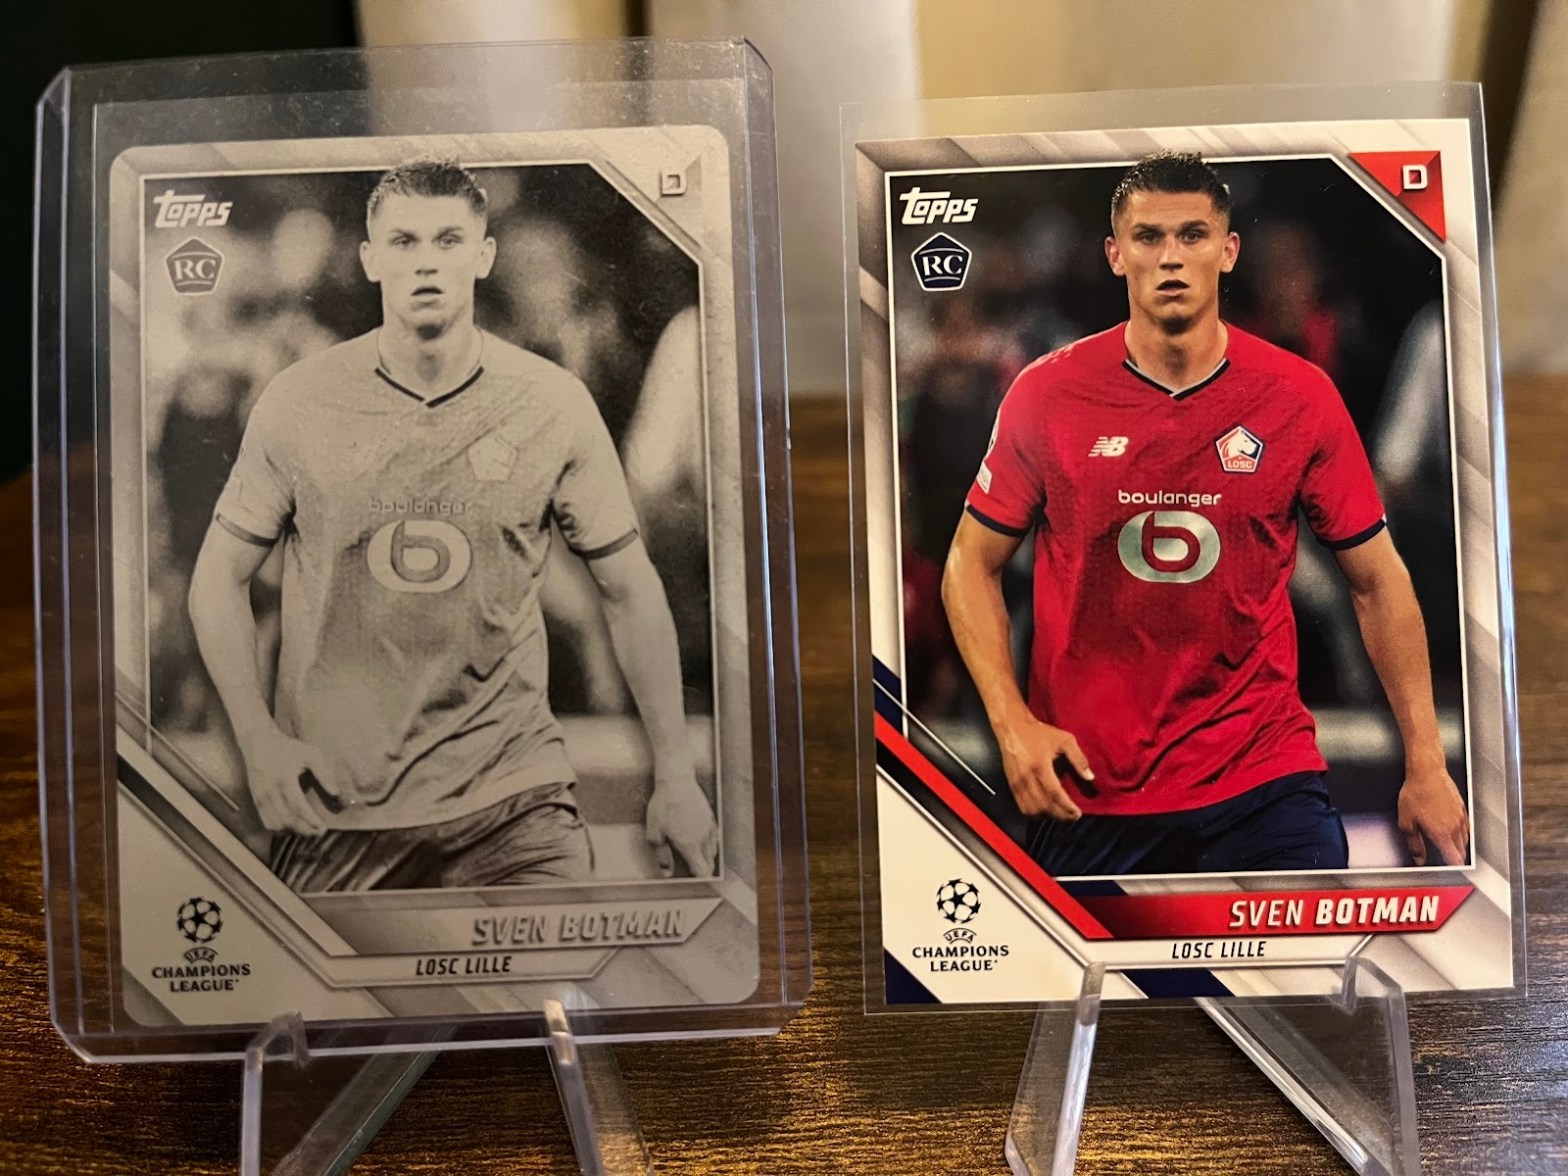 Why aren’t card printing plates worth more money? 